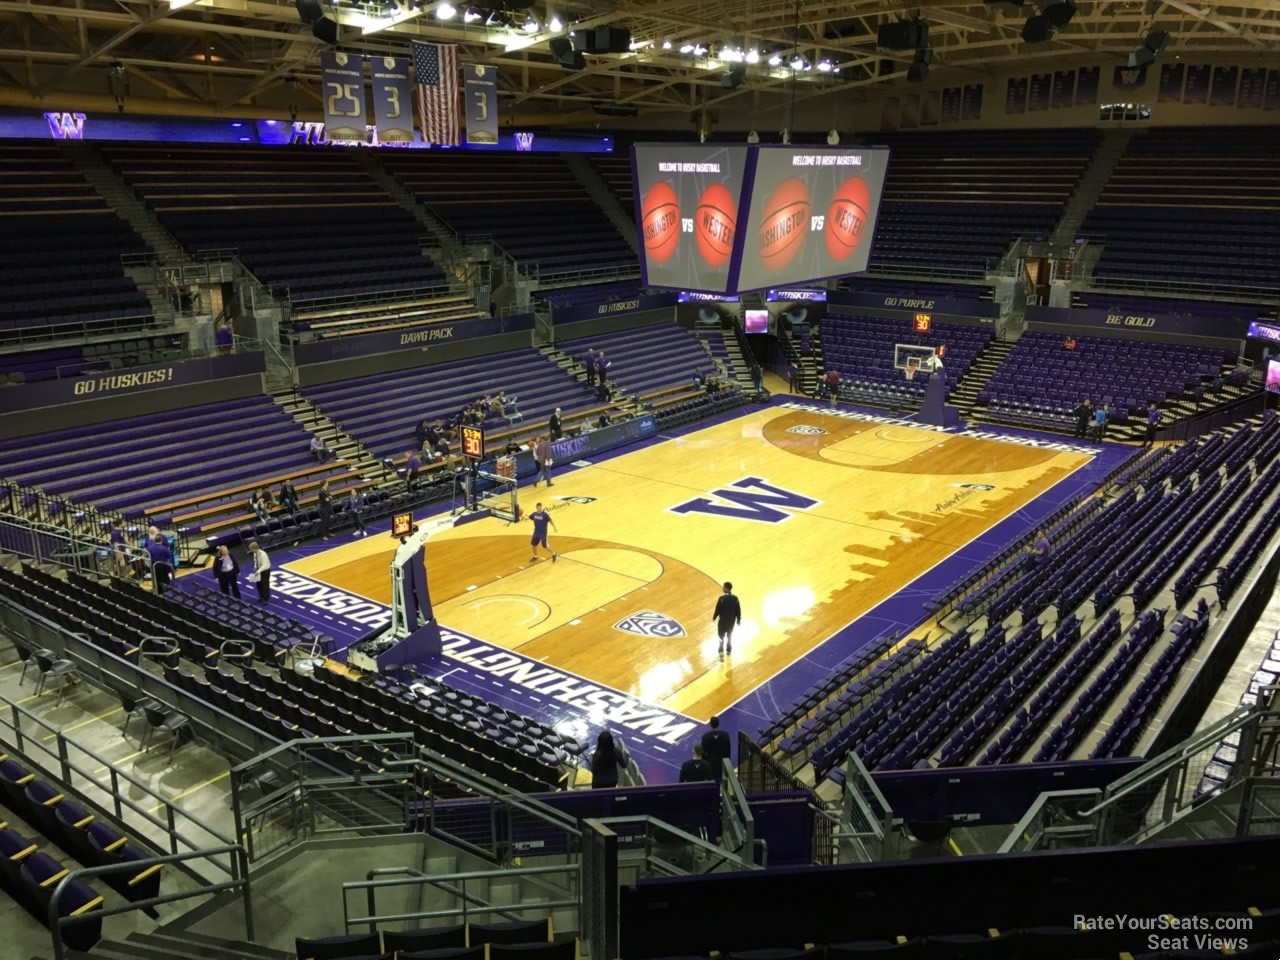 section 10, row 24 seat view  - alaska airlines arena